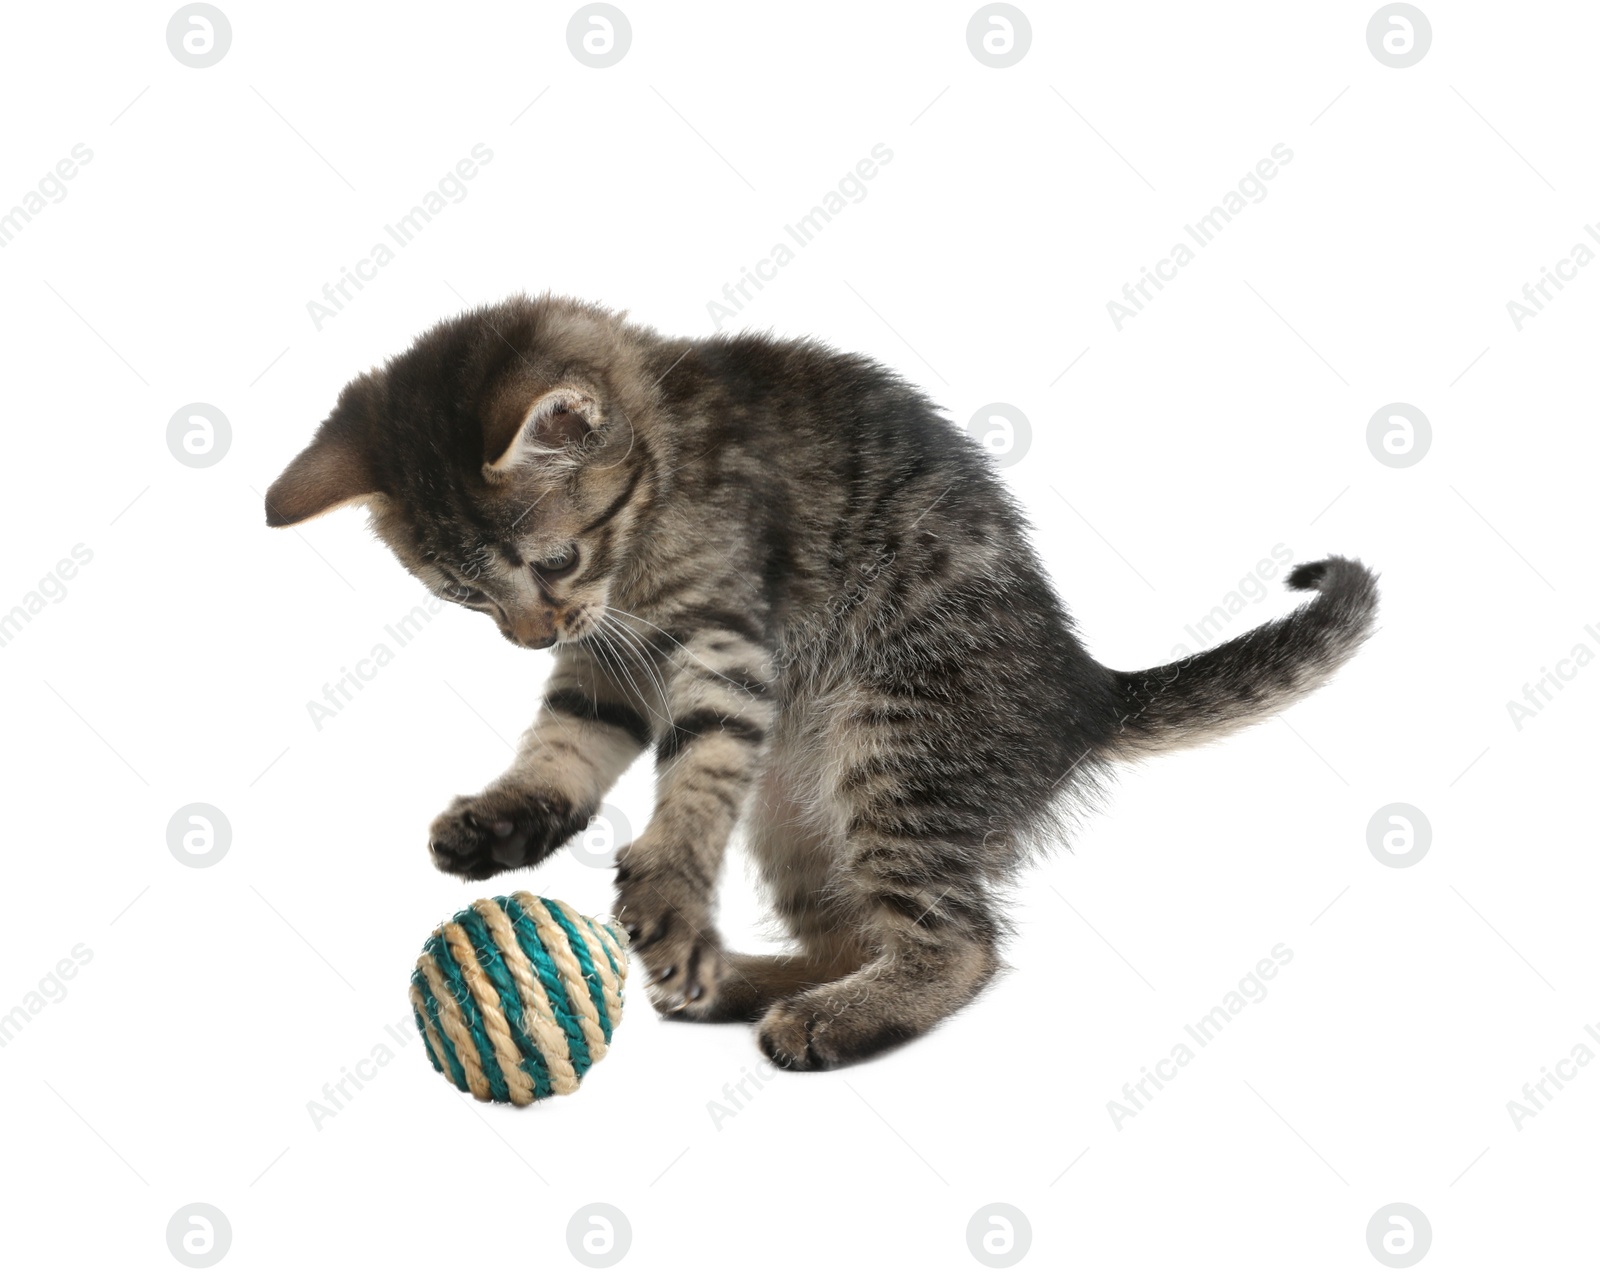 Photo of Little kitten playing with toy ball on white background